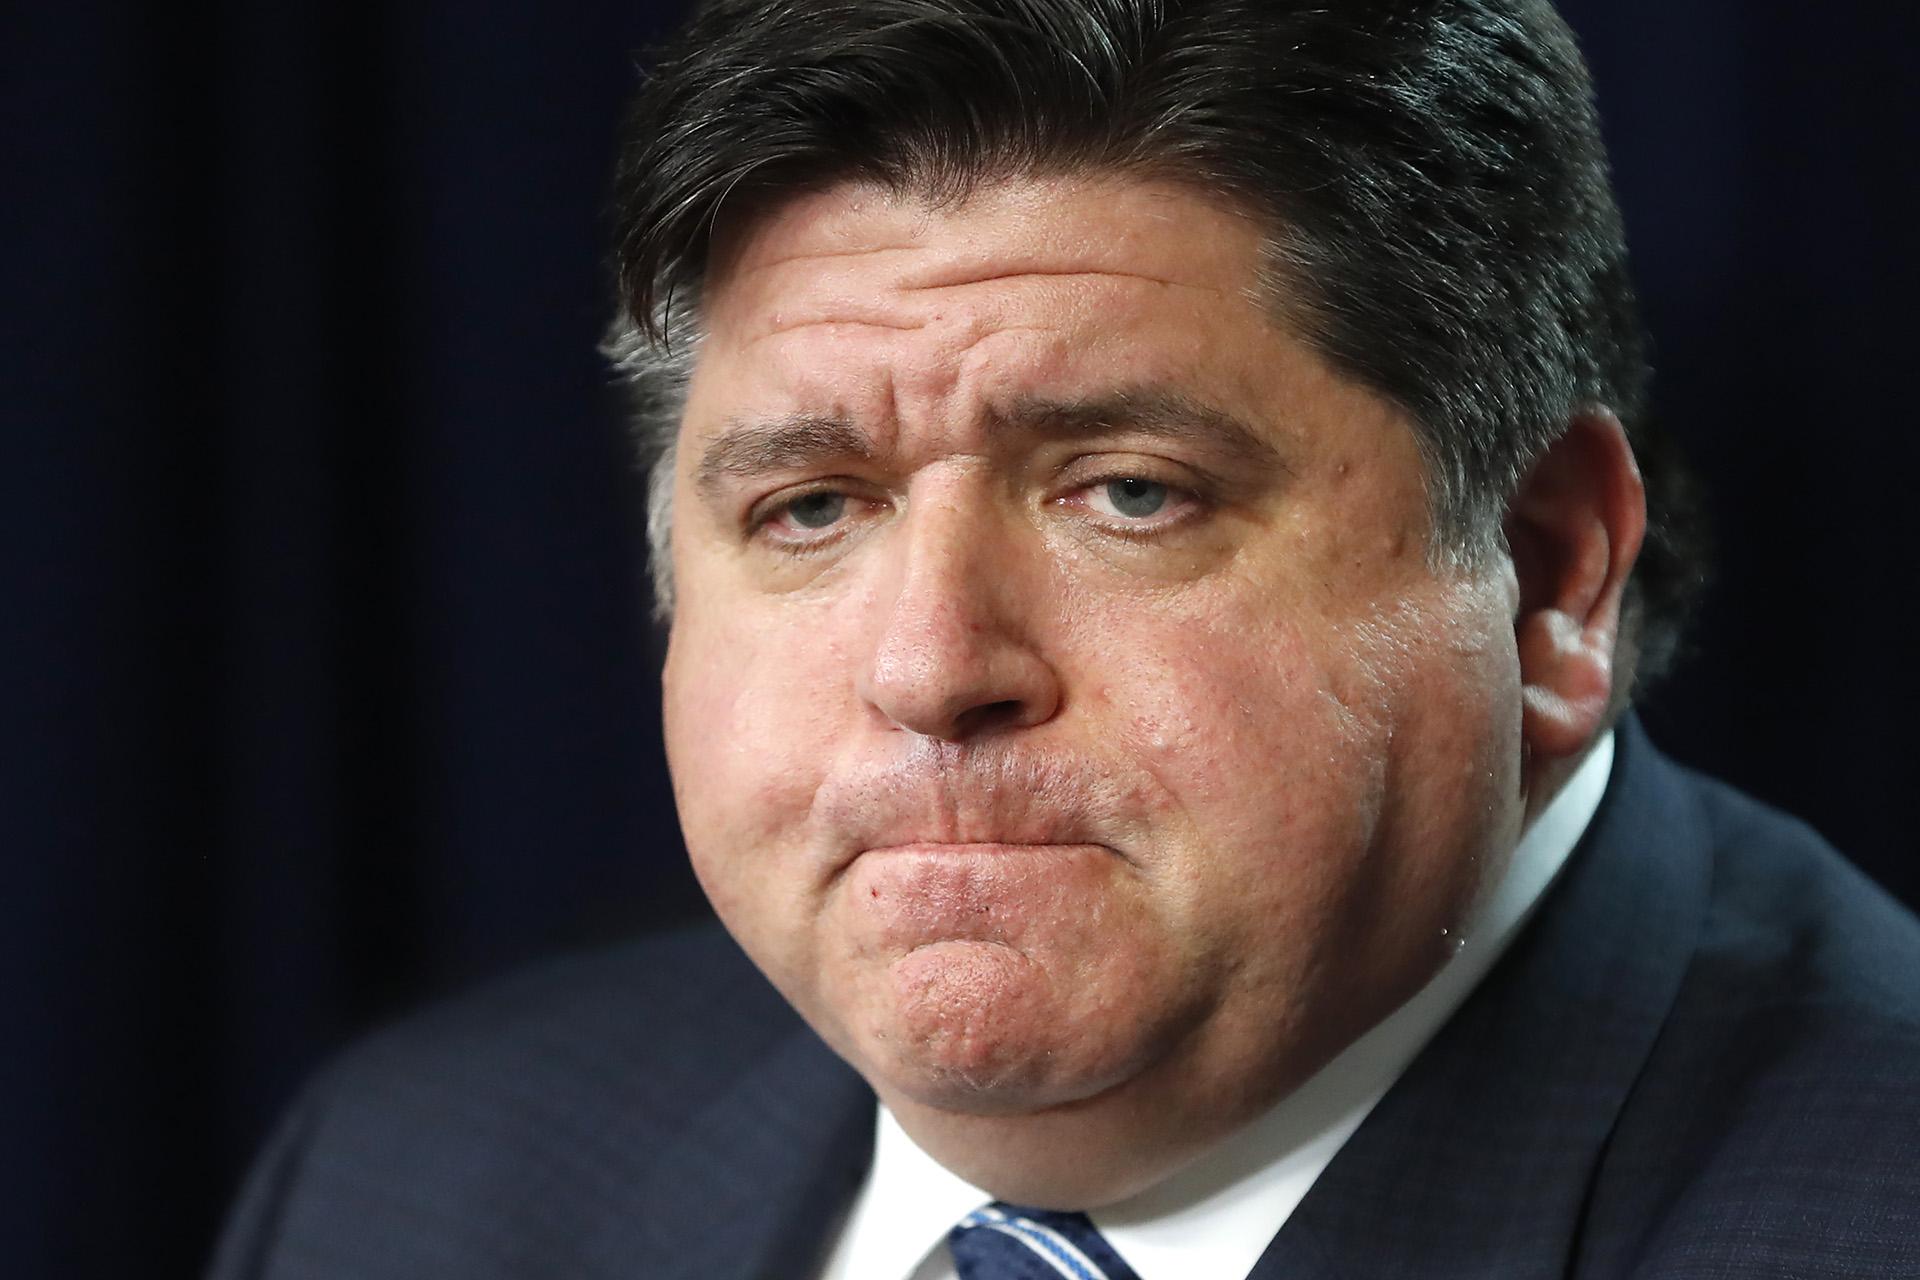 In this March 19, 2020 photo, Illinois Gov. J.B. Pritzker listens to a question during a news conference in Chicago. (AP Photo / Charles Rex Arbogast)